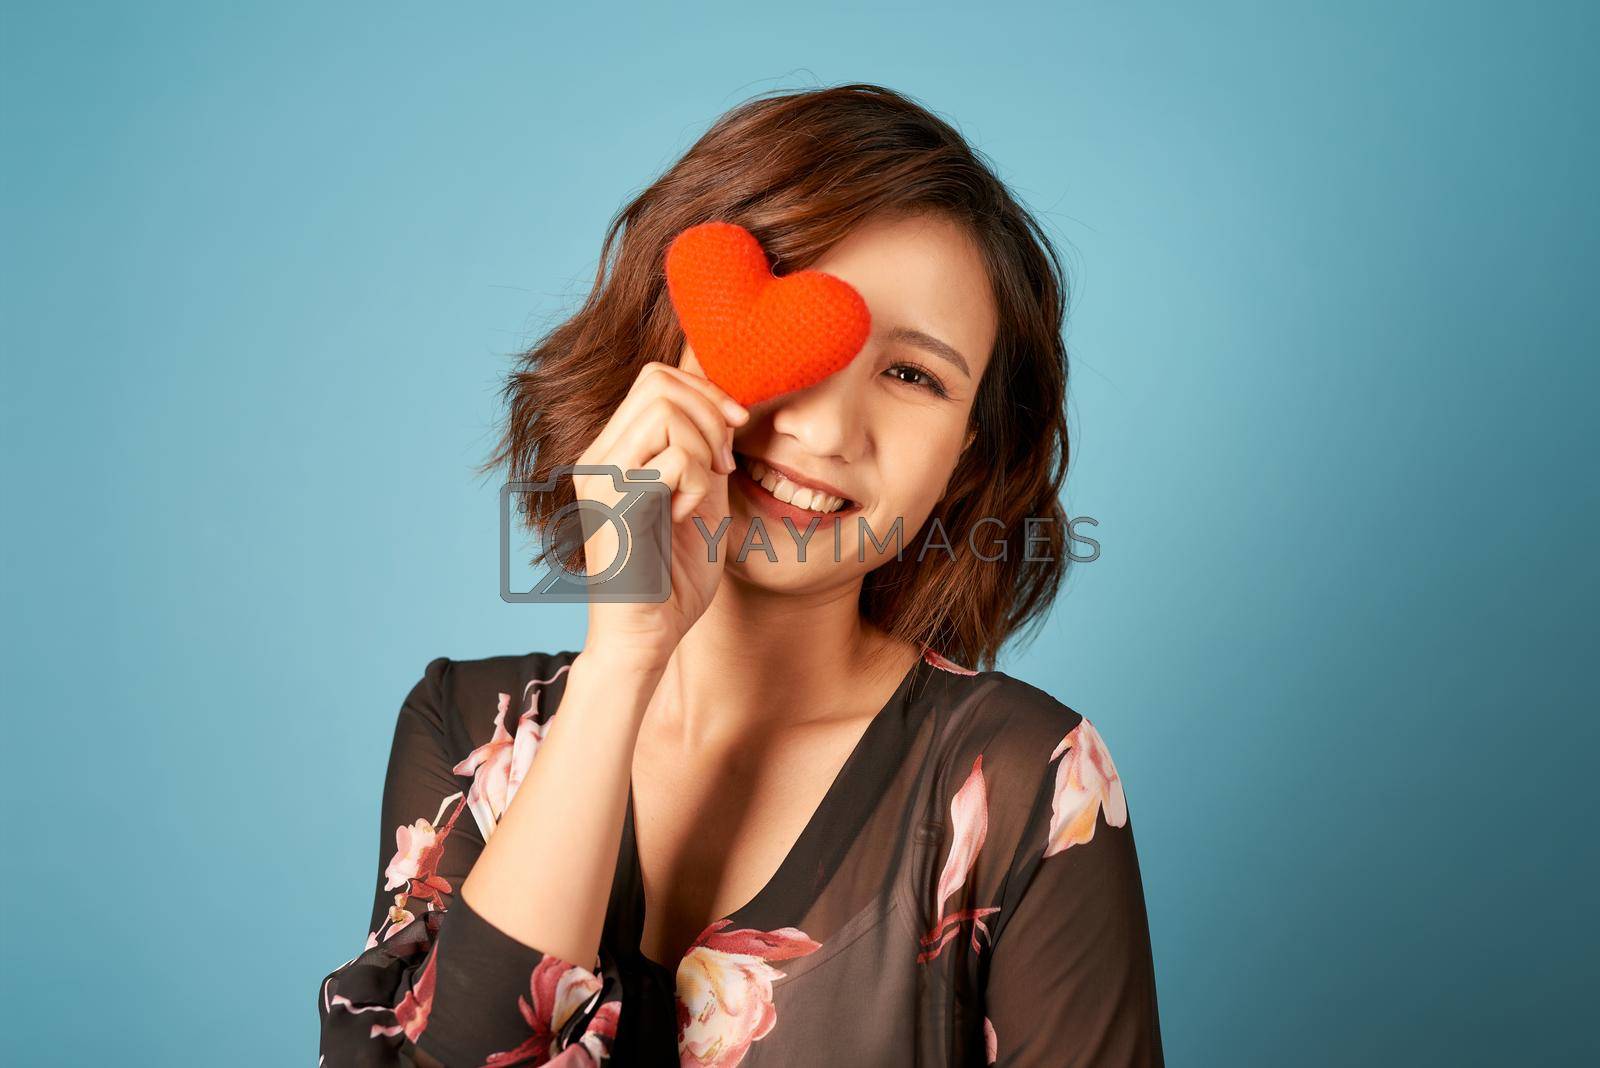 Royalty free image of Picture of beautiful woman covering eye with heart by makidotvn